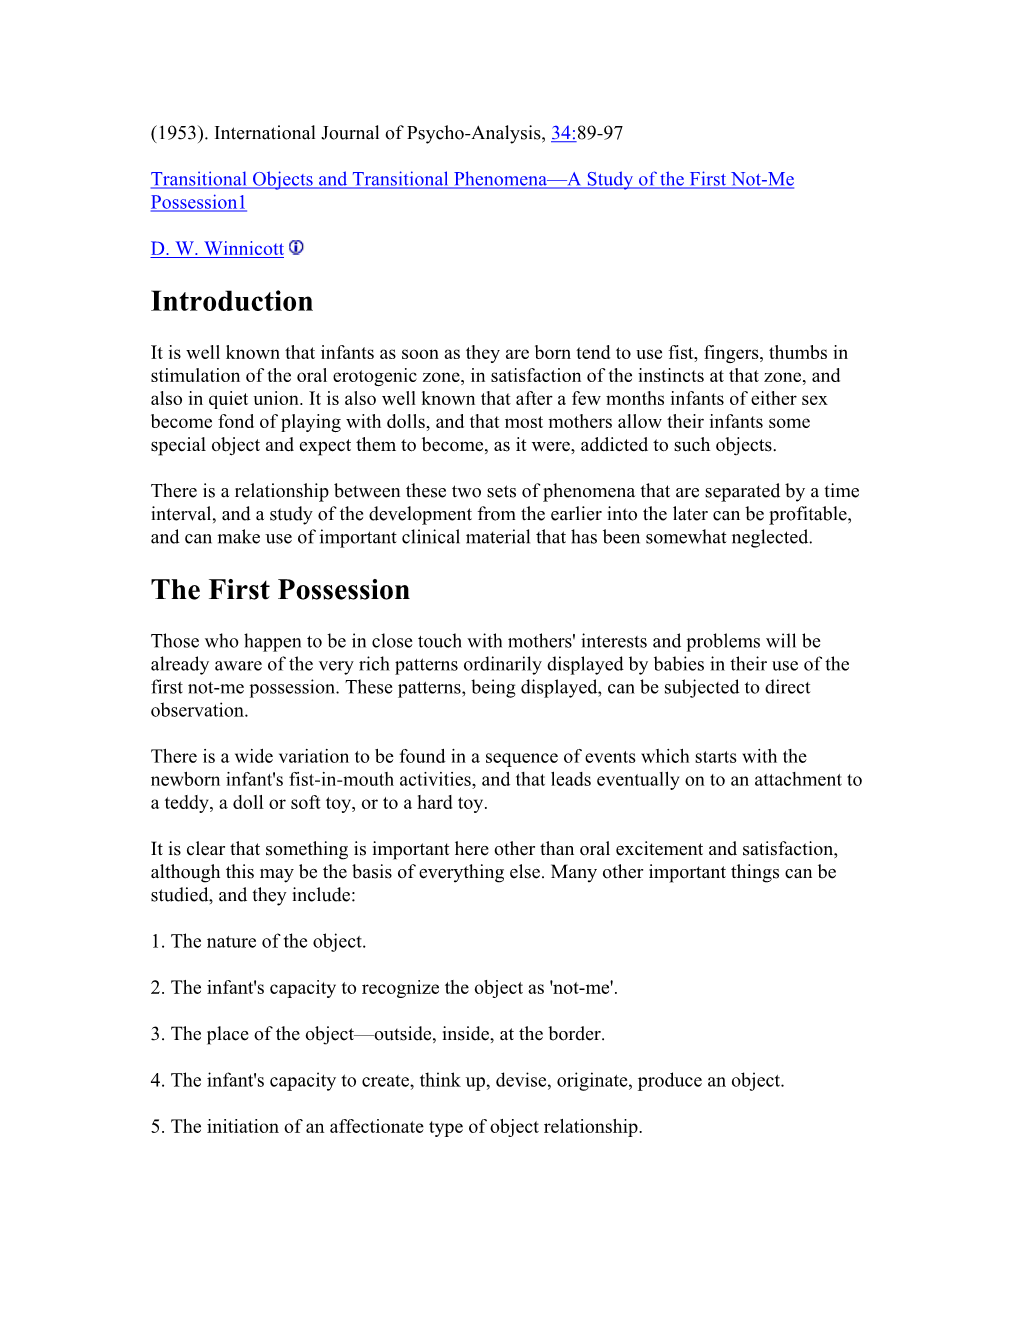 Transitional Objects and Transitional Phenomena—A Study of the First Not-Me Possession1